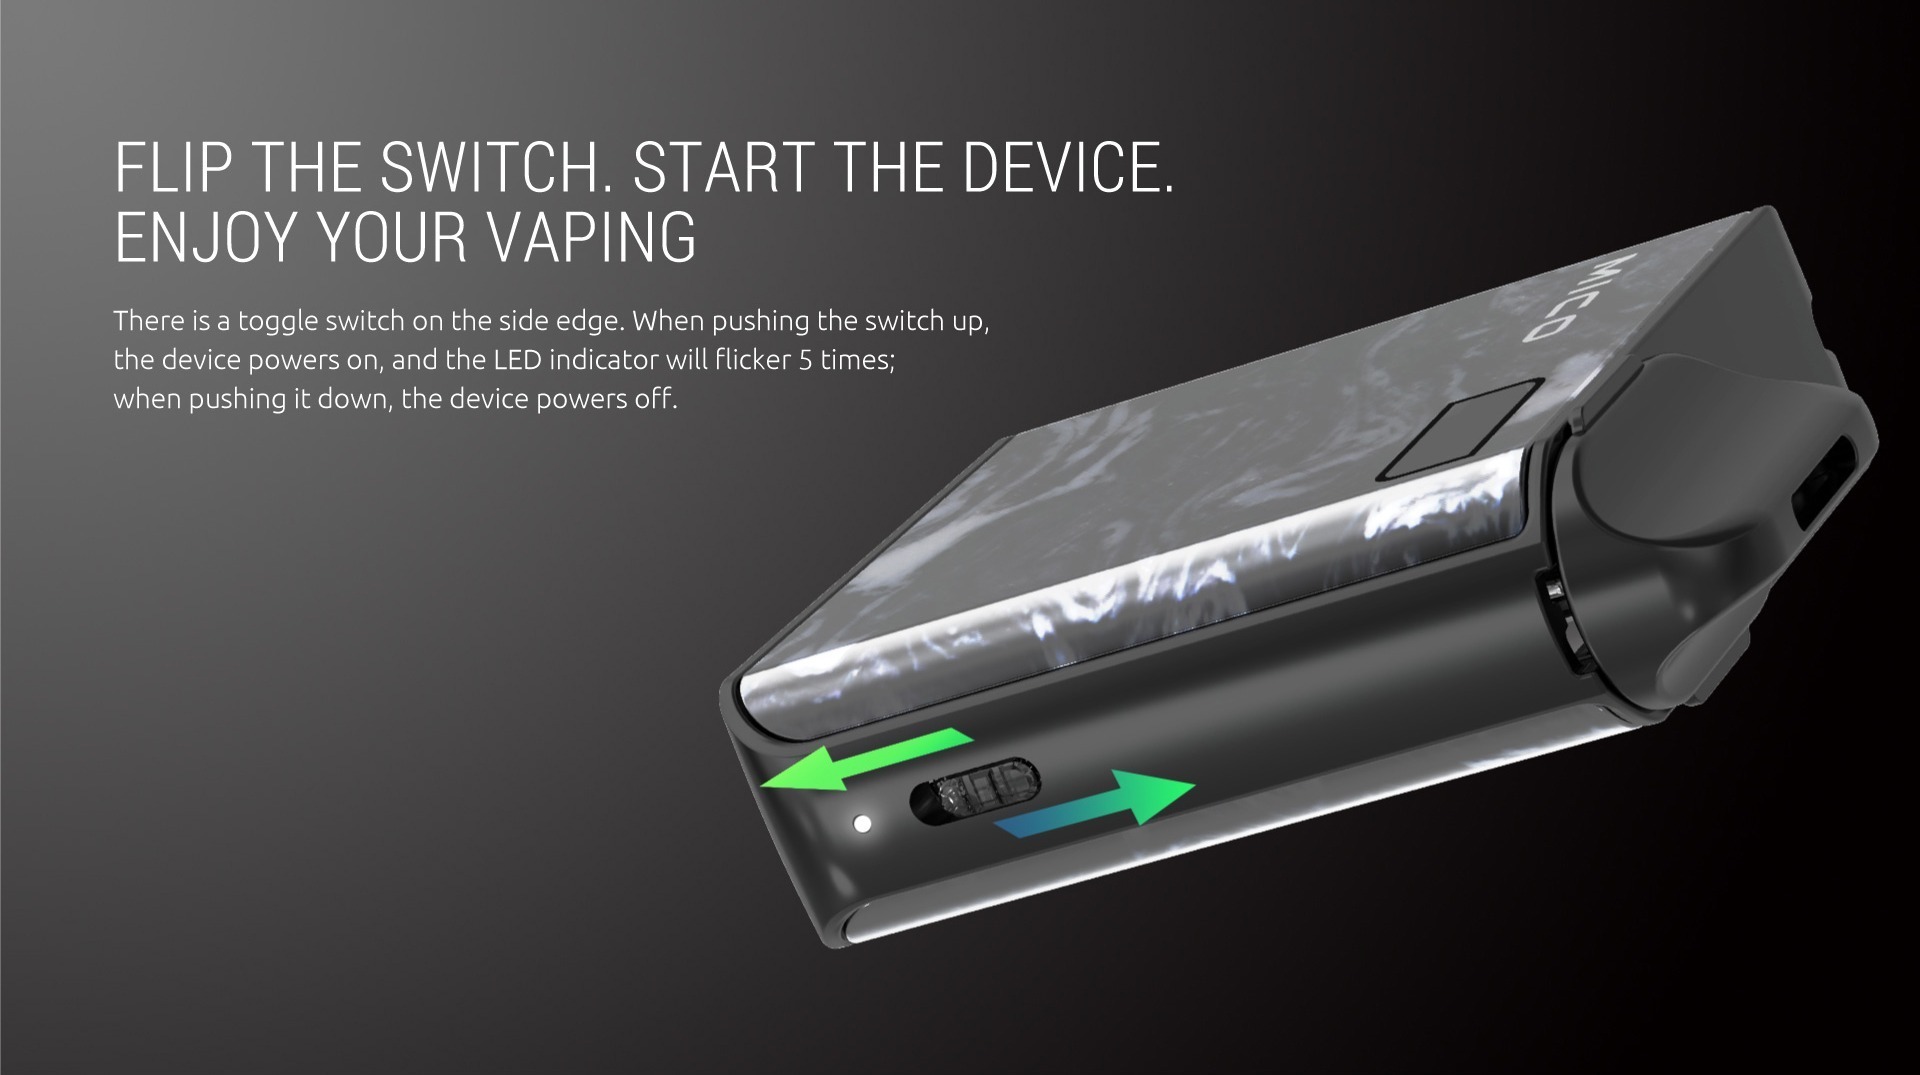 Buy SMOK Mico AIO Kit and enjoy vaping! Find the latest electronic cigarettes from SMOK, VooPoo, Aspire and Joyetech at vape shop!